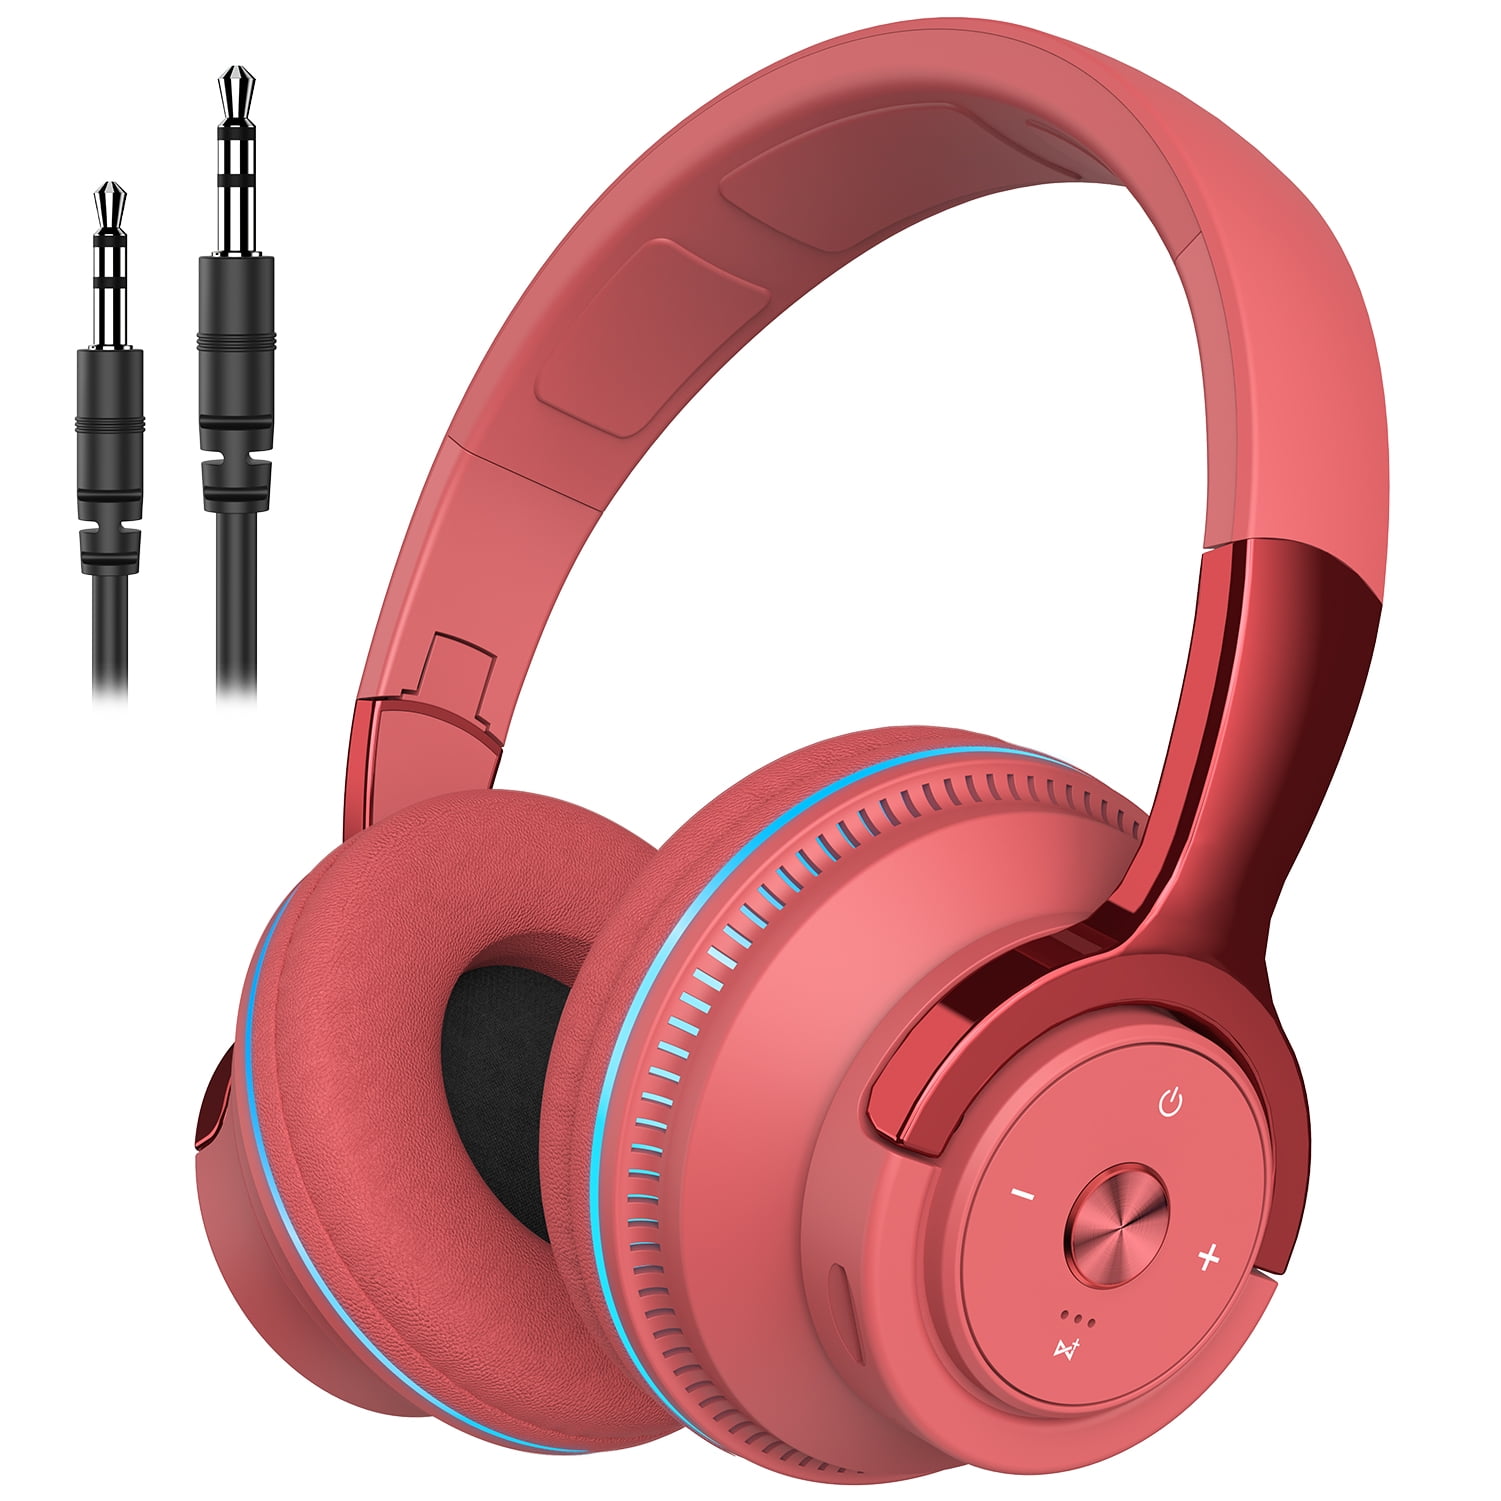 Wireless On-Ear Headphone, Upgrade Bass HiFi Stereo Wireless Foldable & Wireless Mode, Noise Isolating Over Ear Headphone w/ and Volume Control, for Computer Laptop Cell Phone - Walmart.com